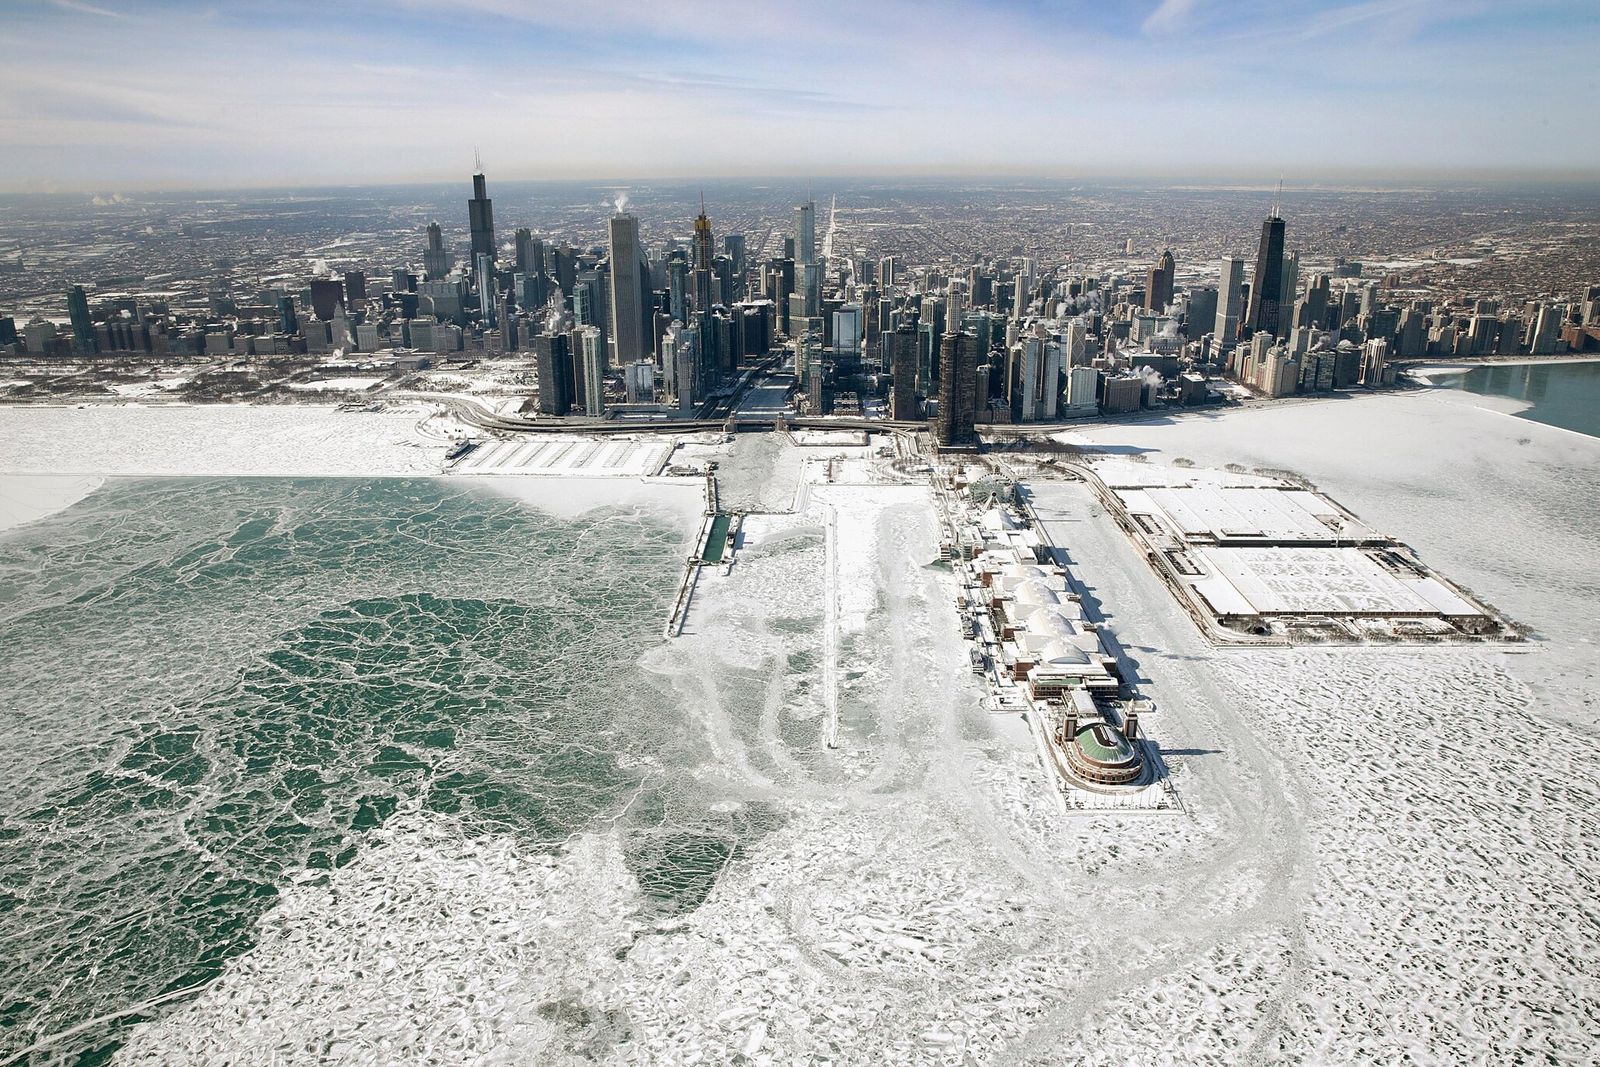 The polar vortex is coming – and it will bring an icy winter